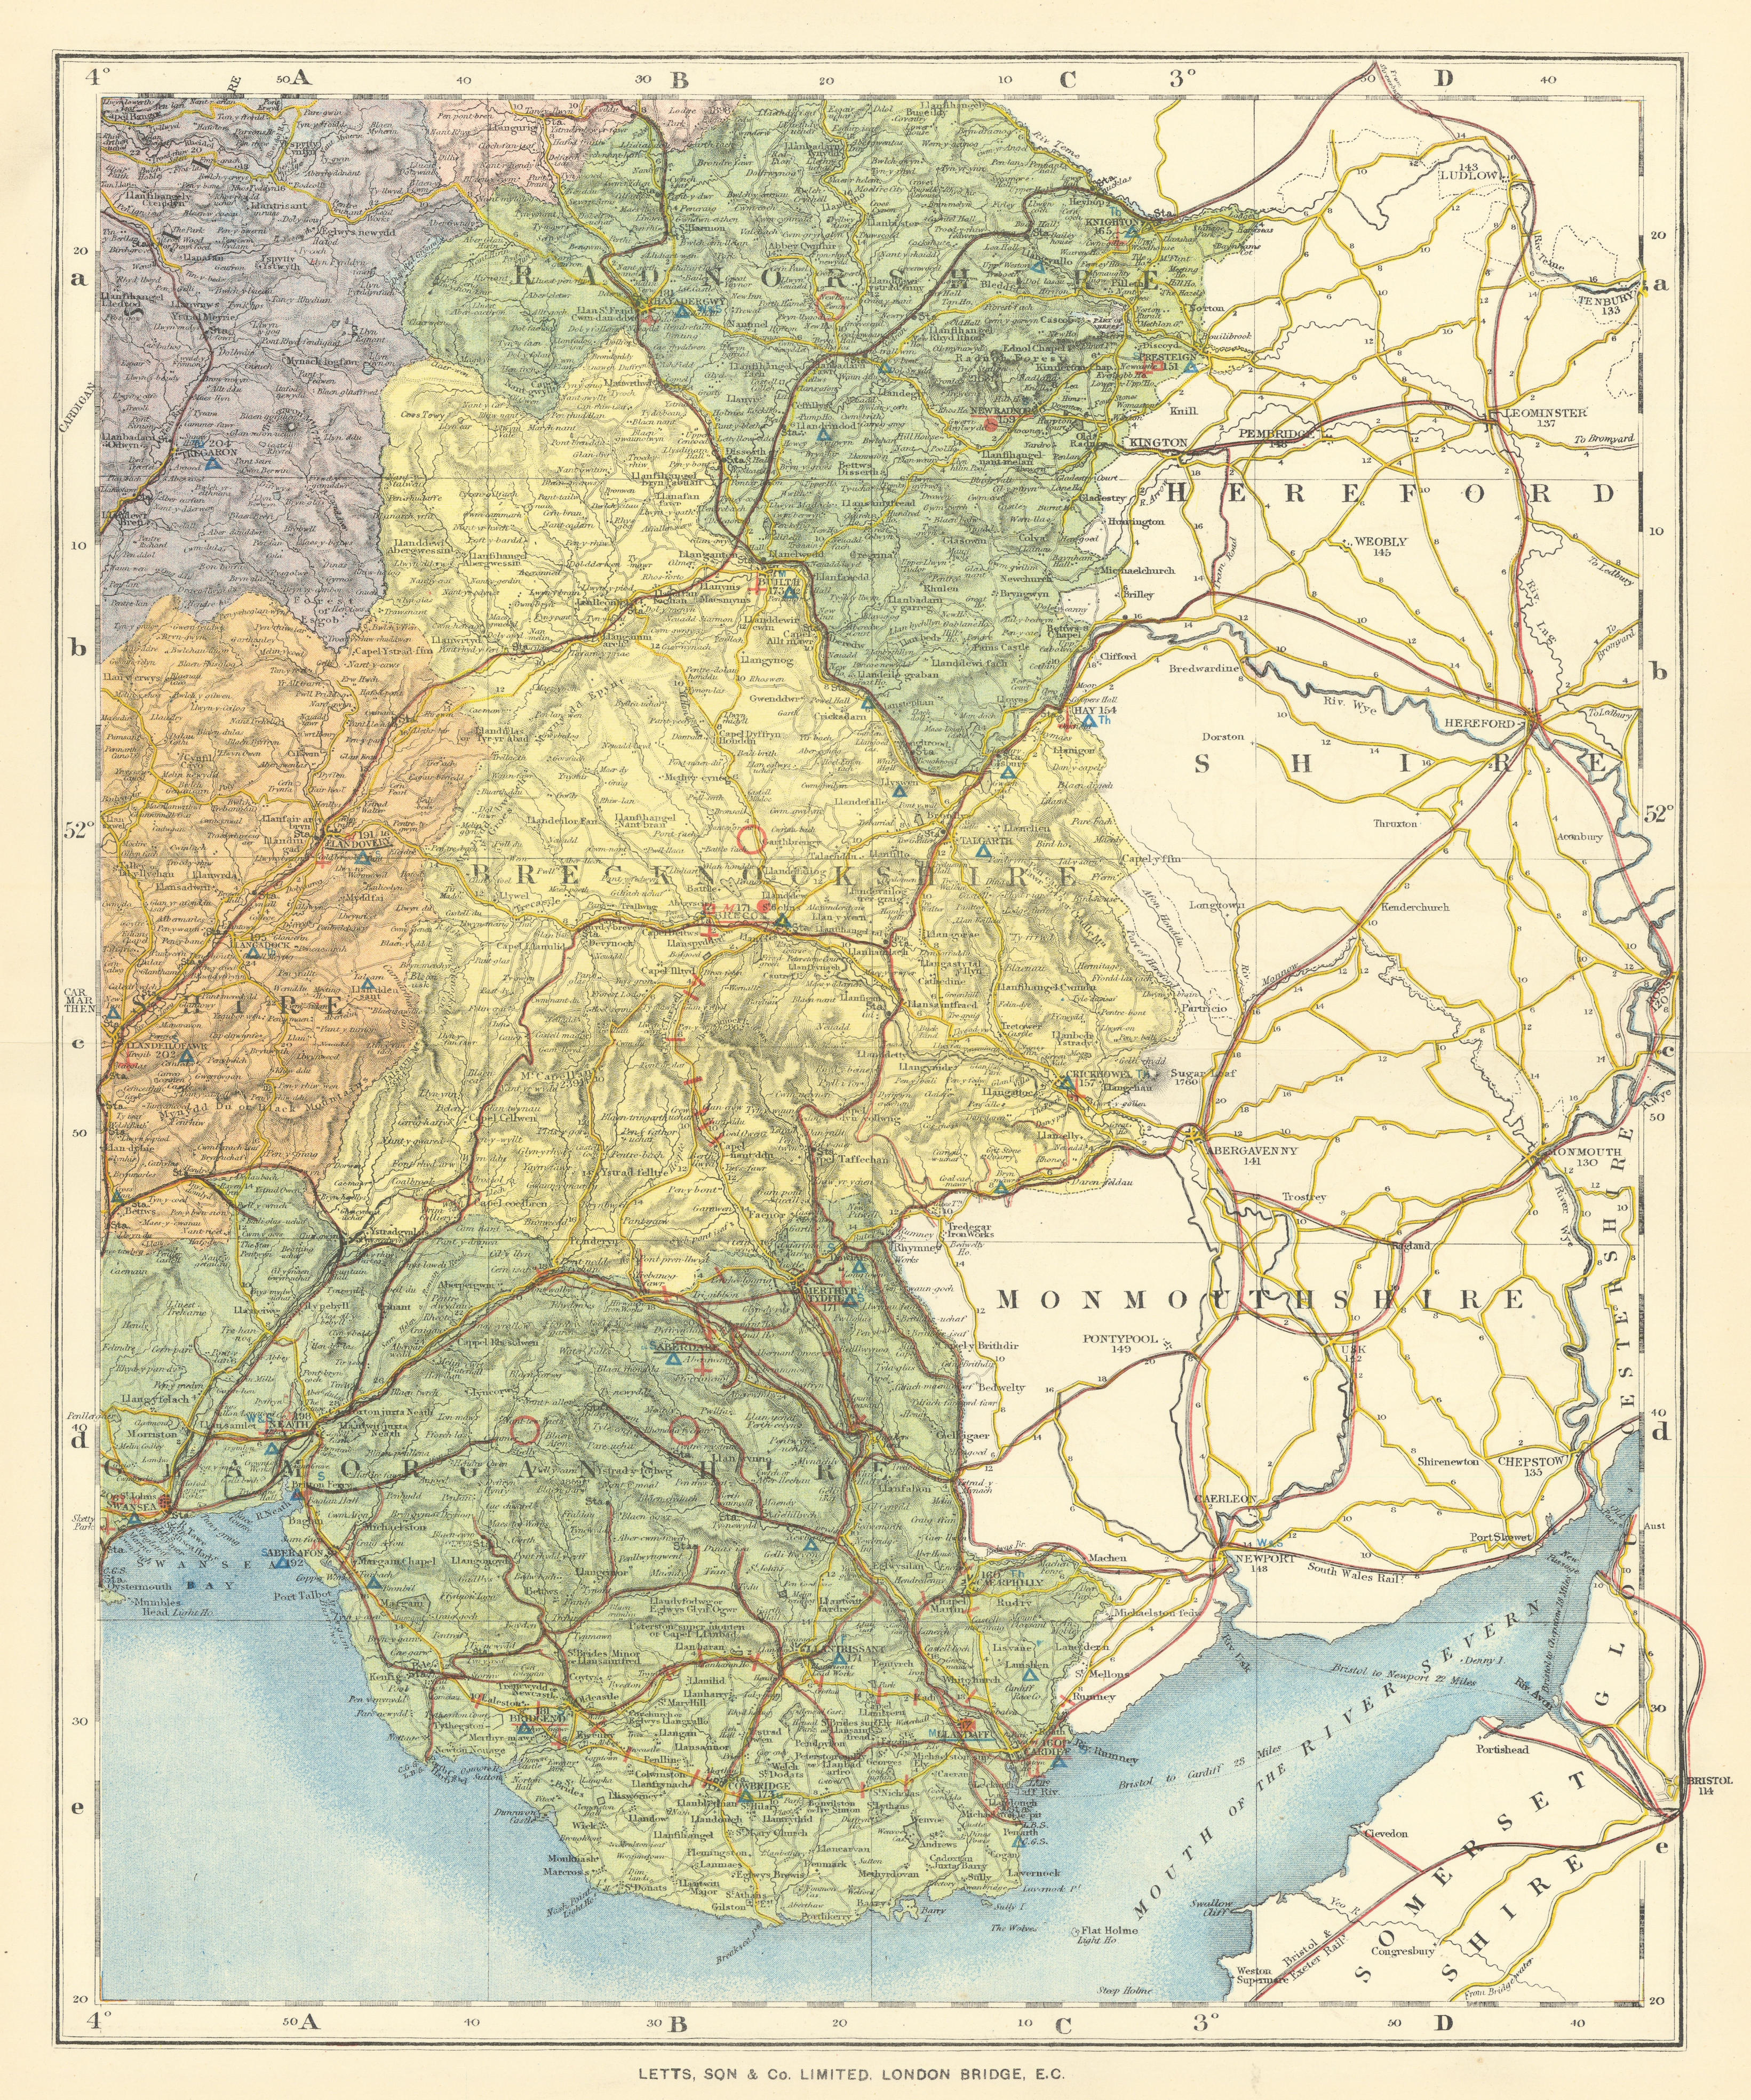 Associate Product South East Wales showing Post Towns & Market Days. LETTS 1884 old antique map